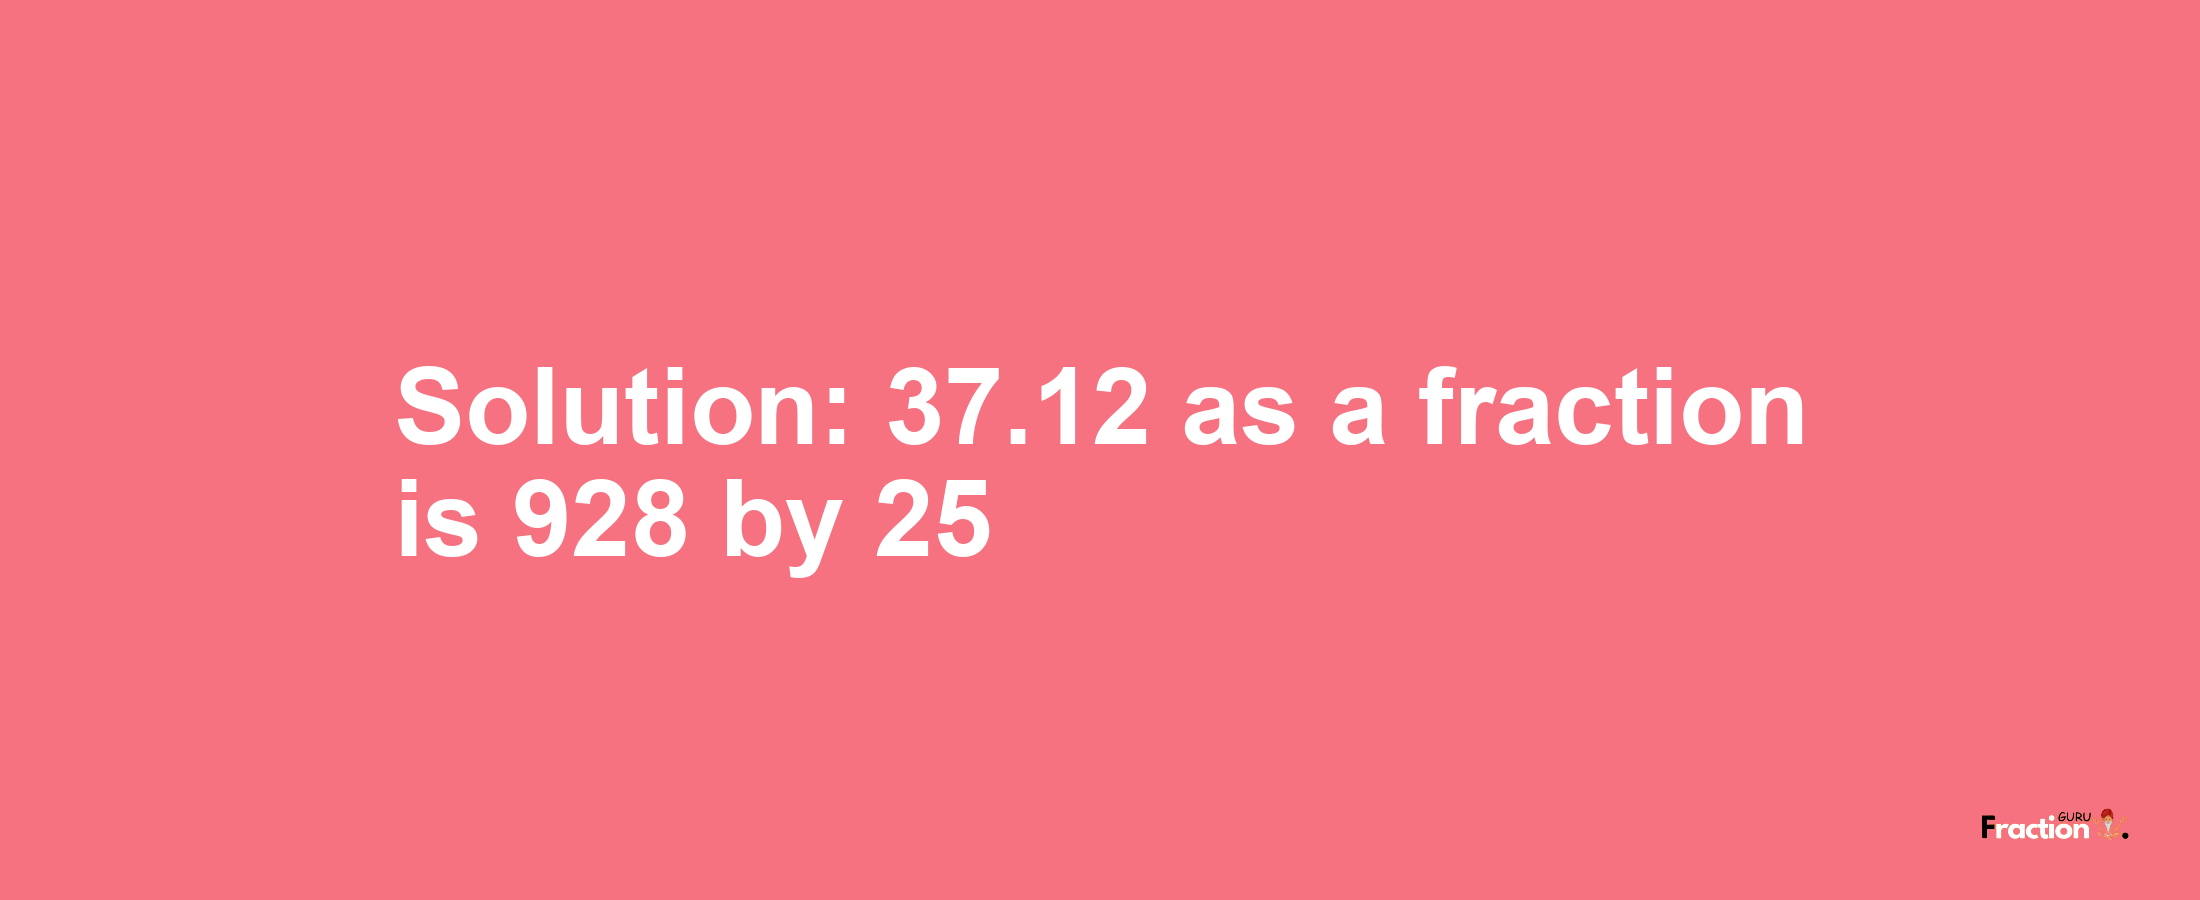 Solution:37.12 as a fraction is 928/25